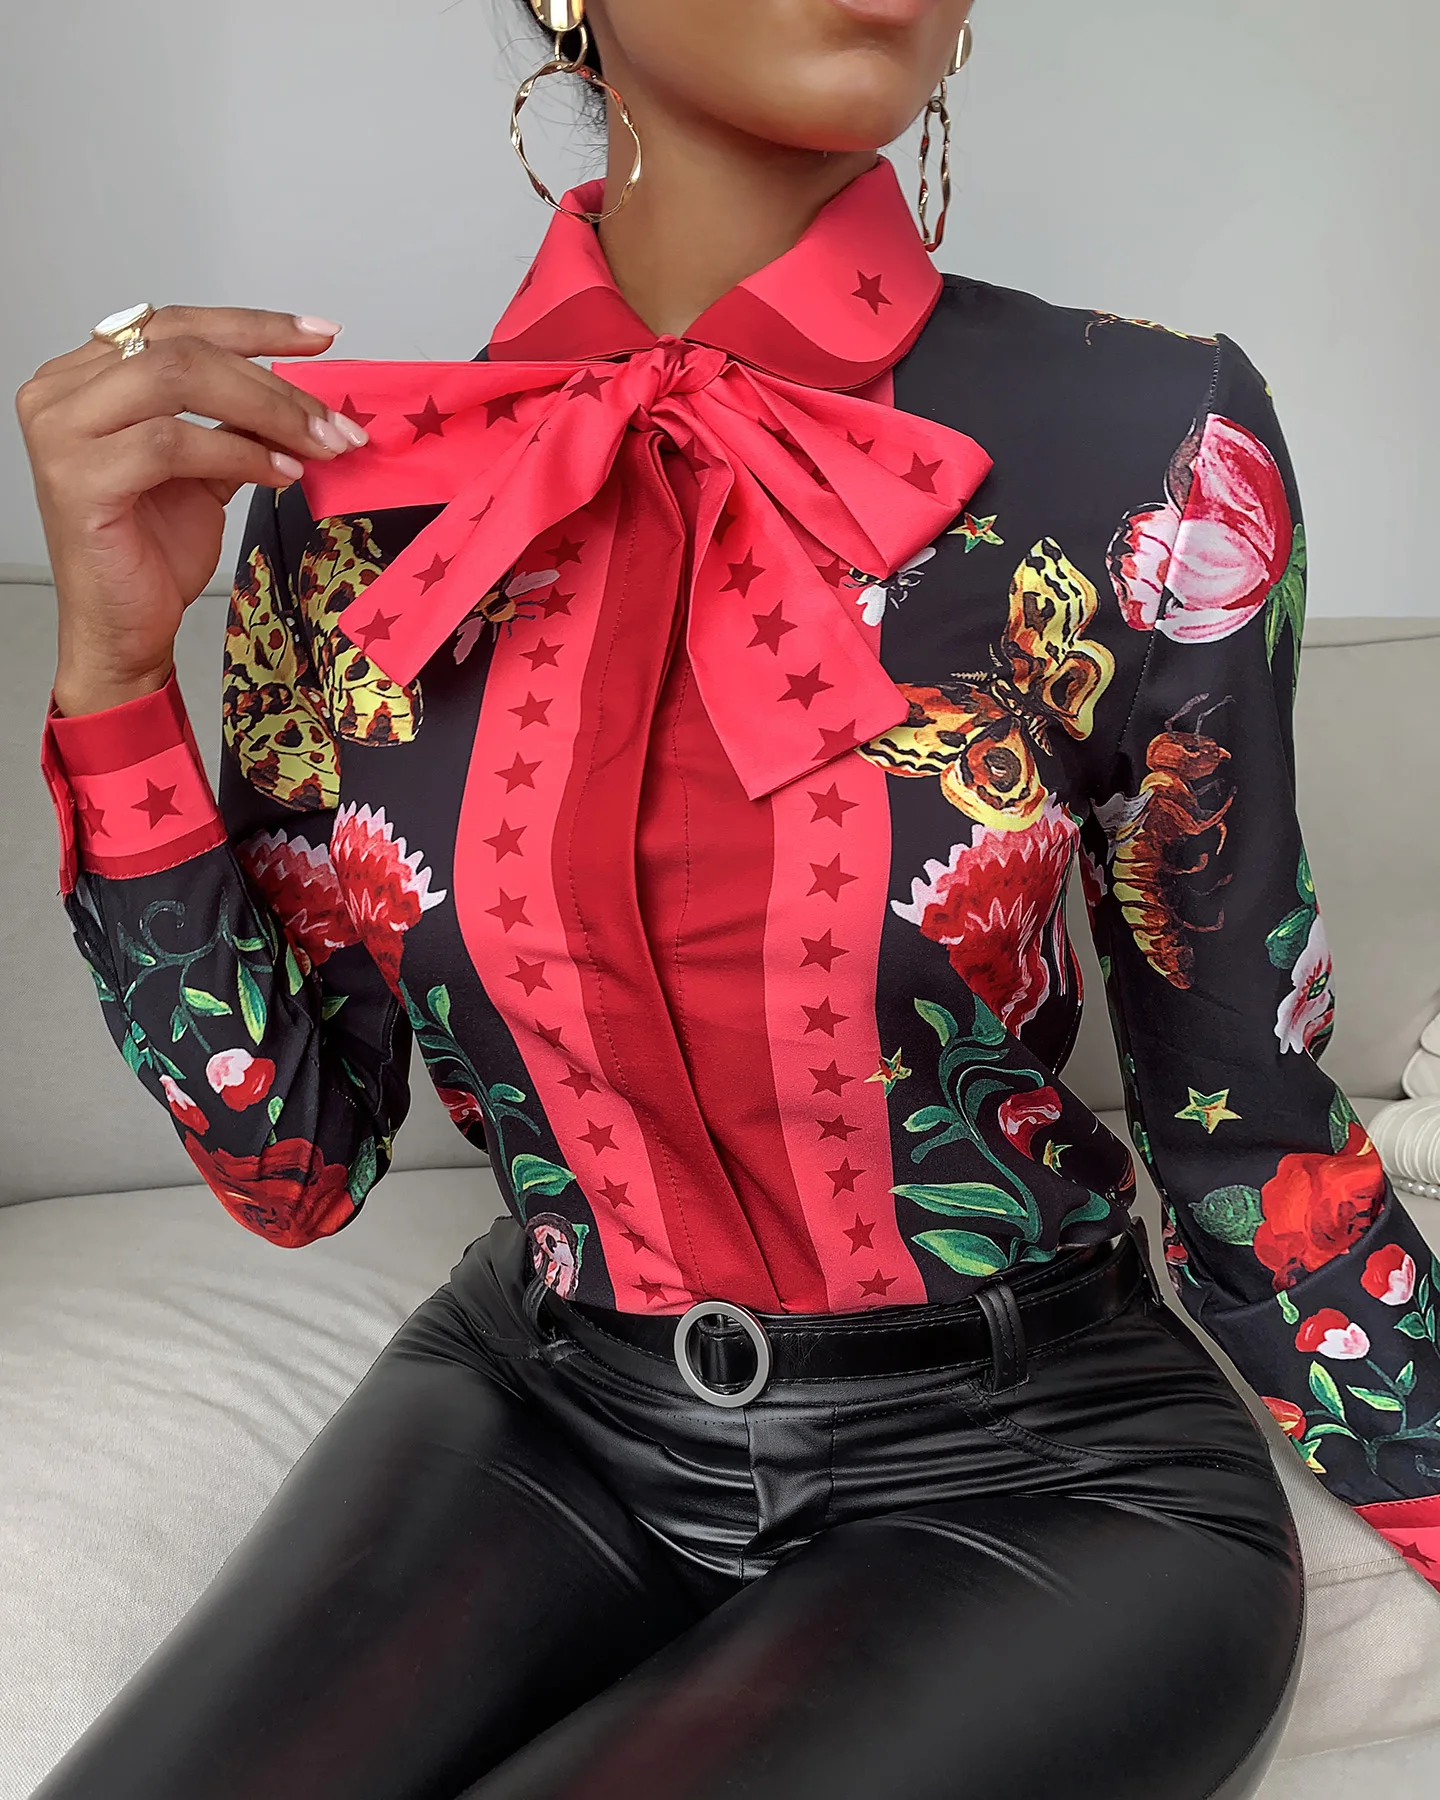 2020 Women Casual Autumn Turn-down Collar Chic Chiffon Blouse Tie Neck Floral Butterfly Print Long Sleeve Blouse Ladies Shirt womens shirts